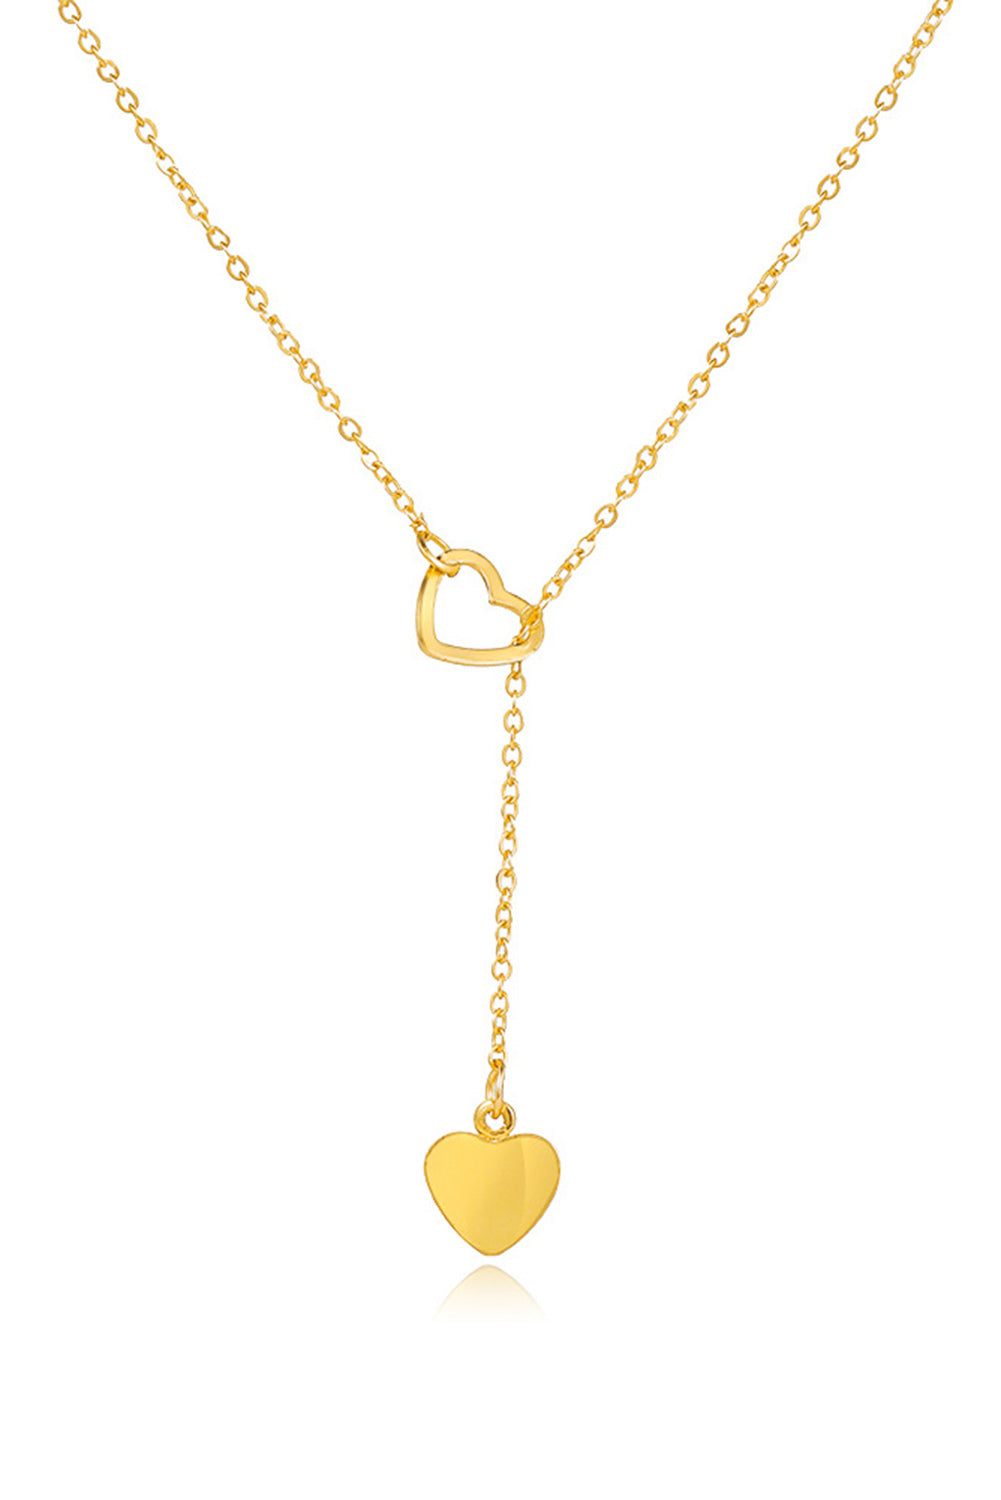 Gold Heart Shape Hollow Lariat Necklace Jewelry JT's Designer Fashion